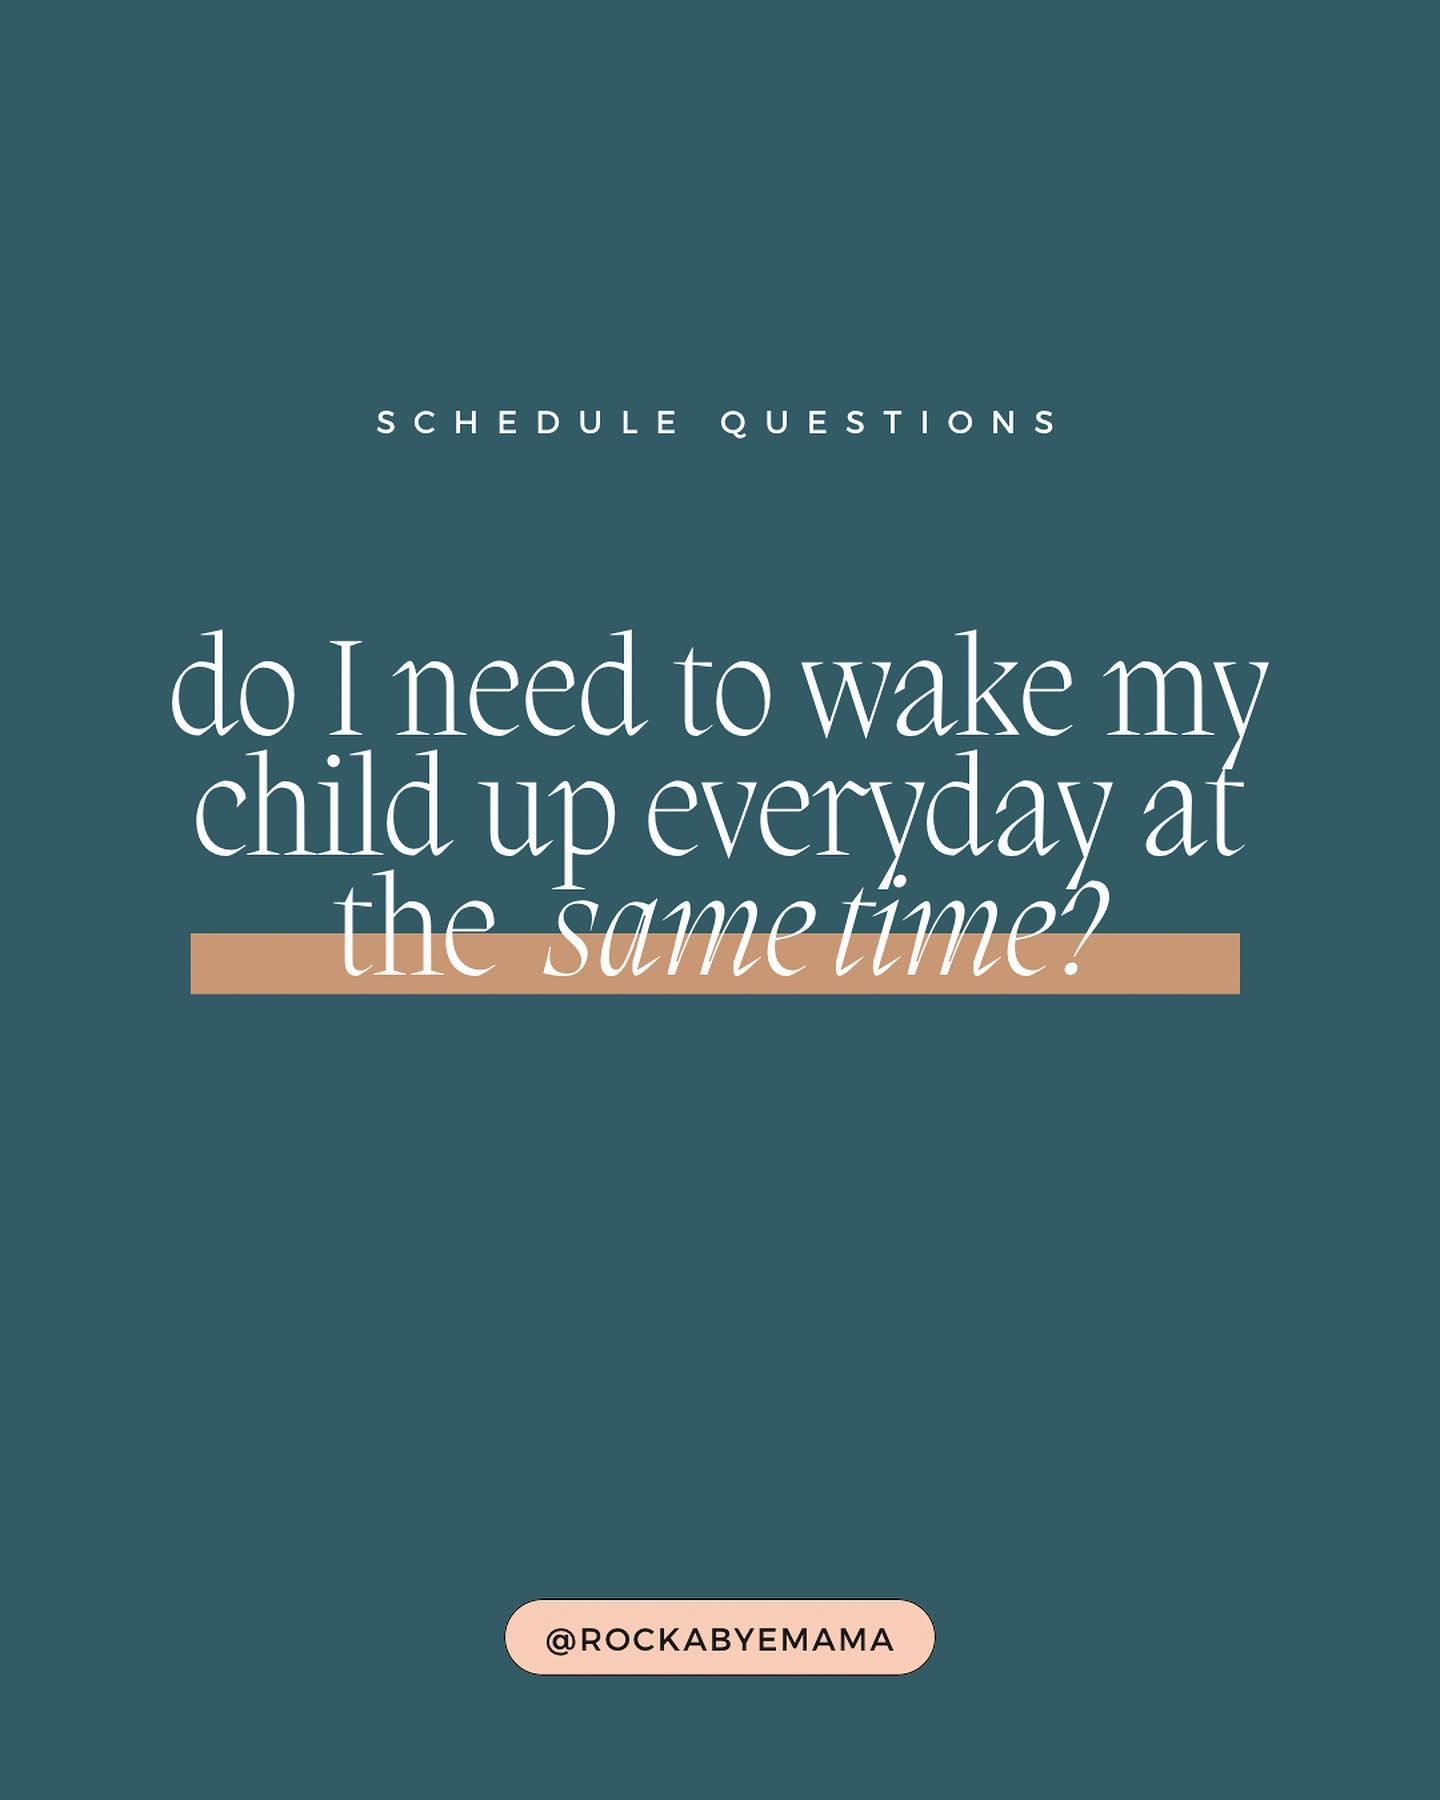 Are there benefits to keeping a consistent wake time?

Yes.

Are there benefits to letting your child wake up whenever they do?

Yes.

At the end of the day, it&rsquo;s most important that you do what works for your family.